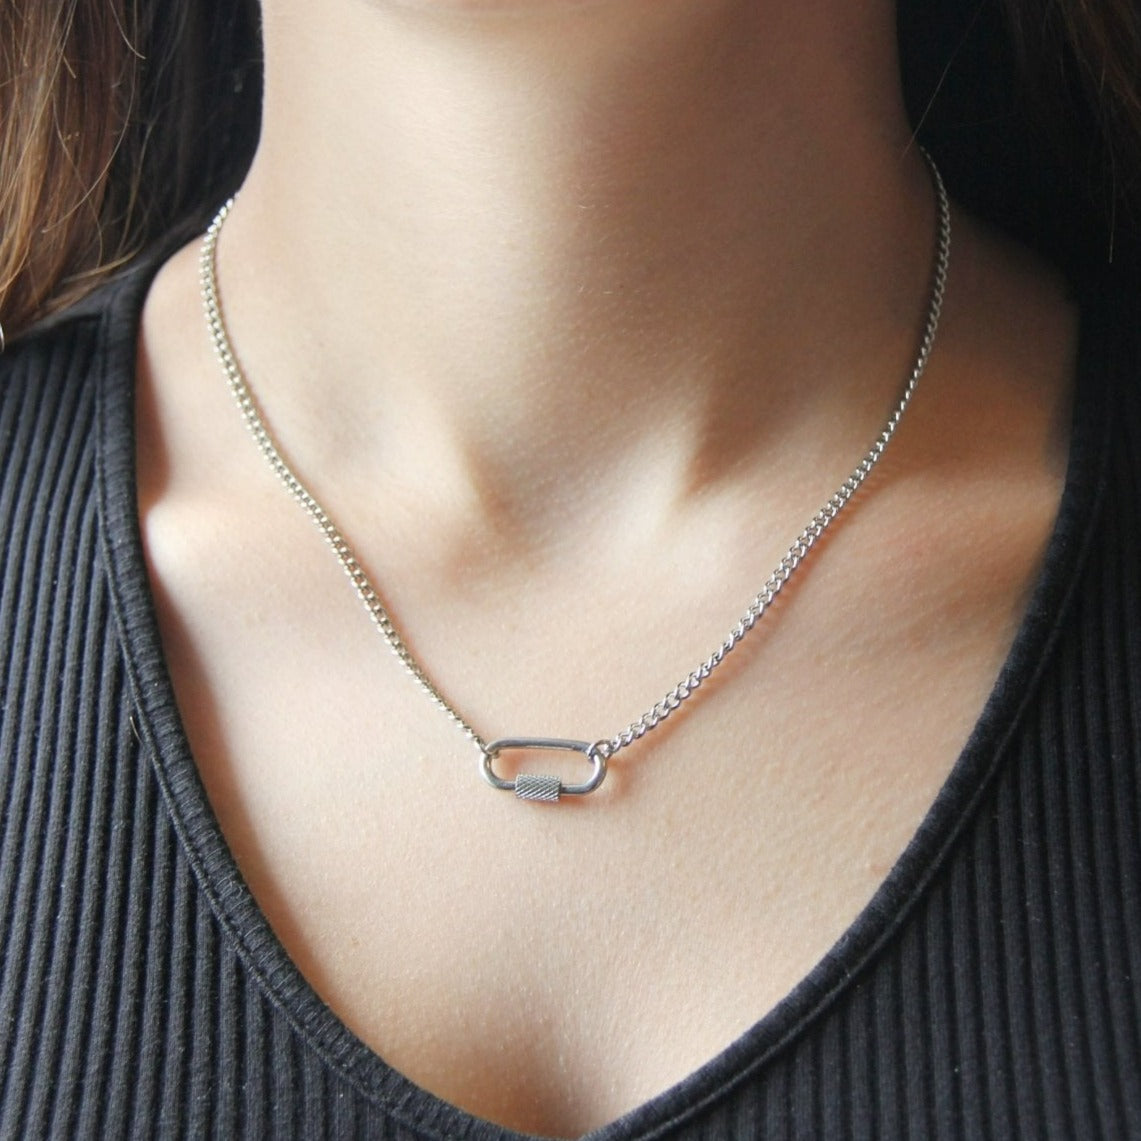 Silver or Gold Carabiner Pendant Necklace For Women or Men